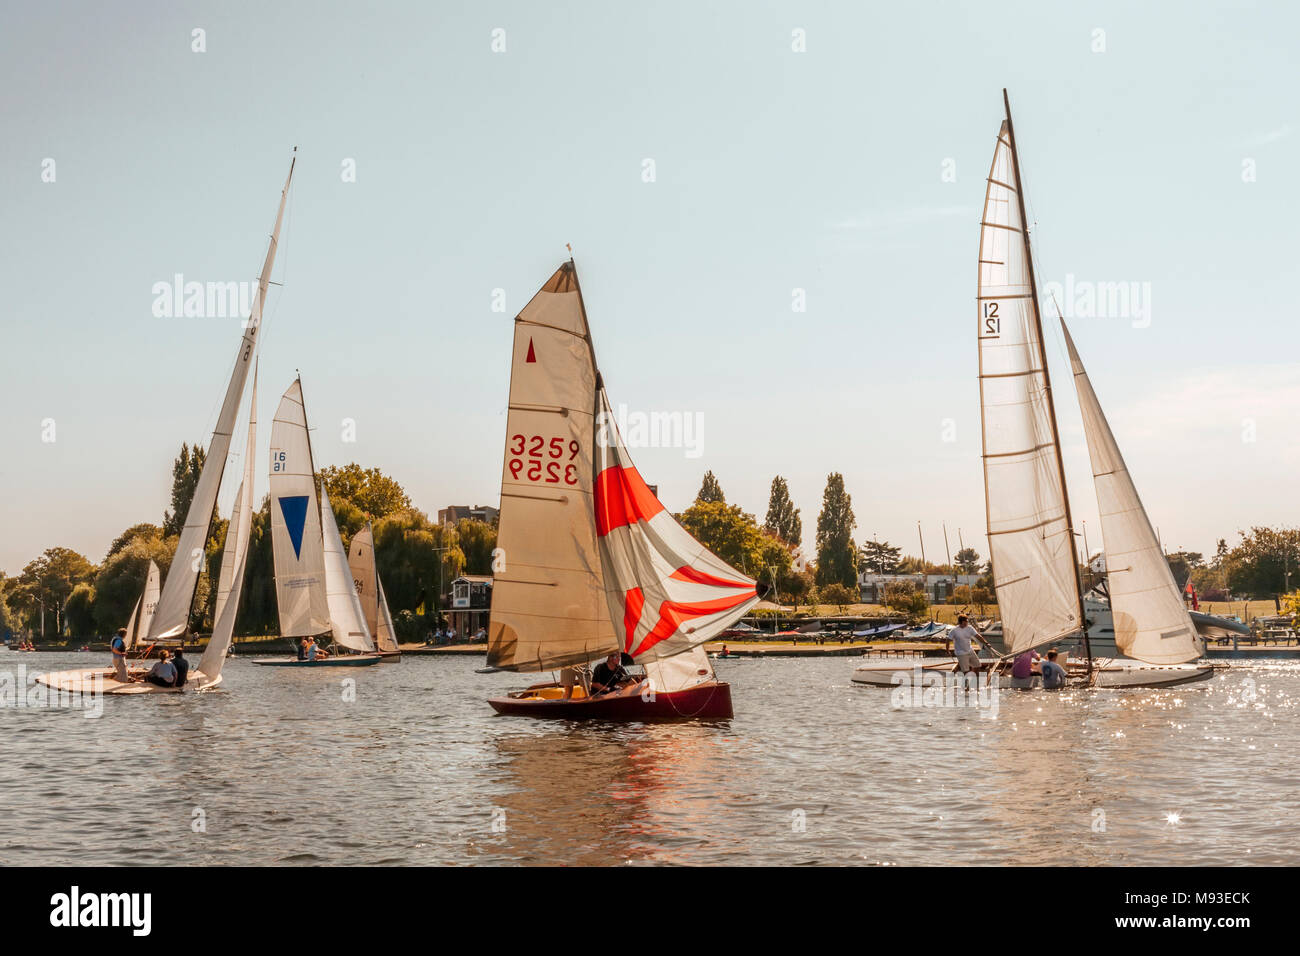 Yachts on the river thames on a bright sunny afternoon reflecting in the water sailing and leaning in summer breeze with riverbank landscape and trees Stock Photo